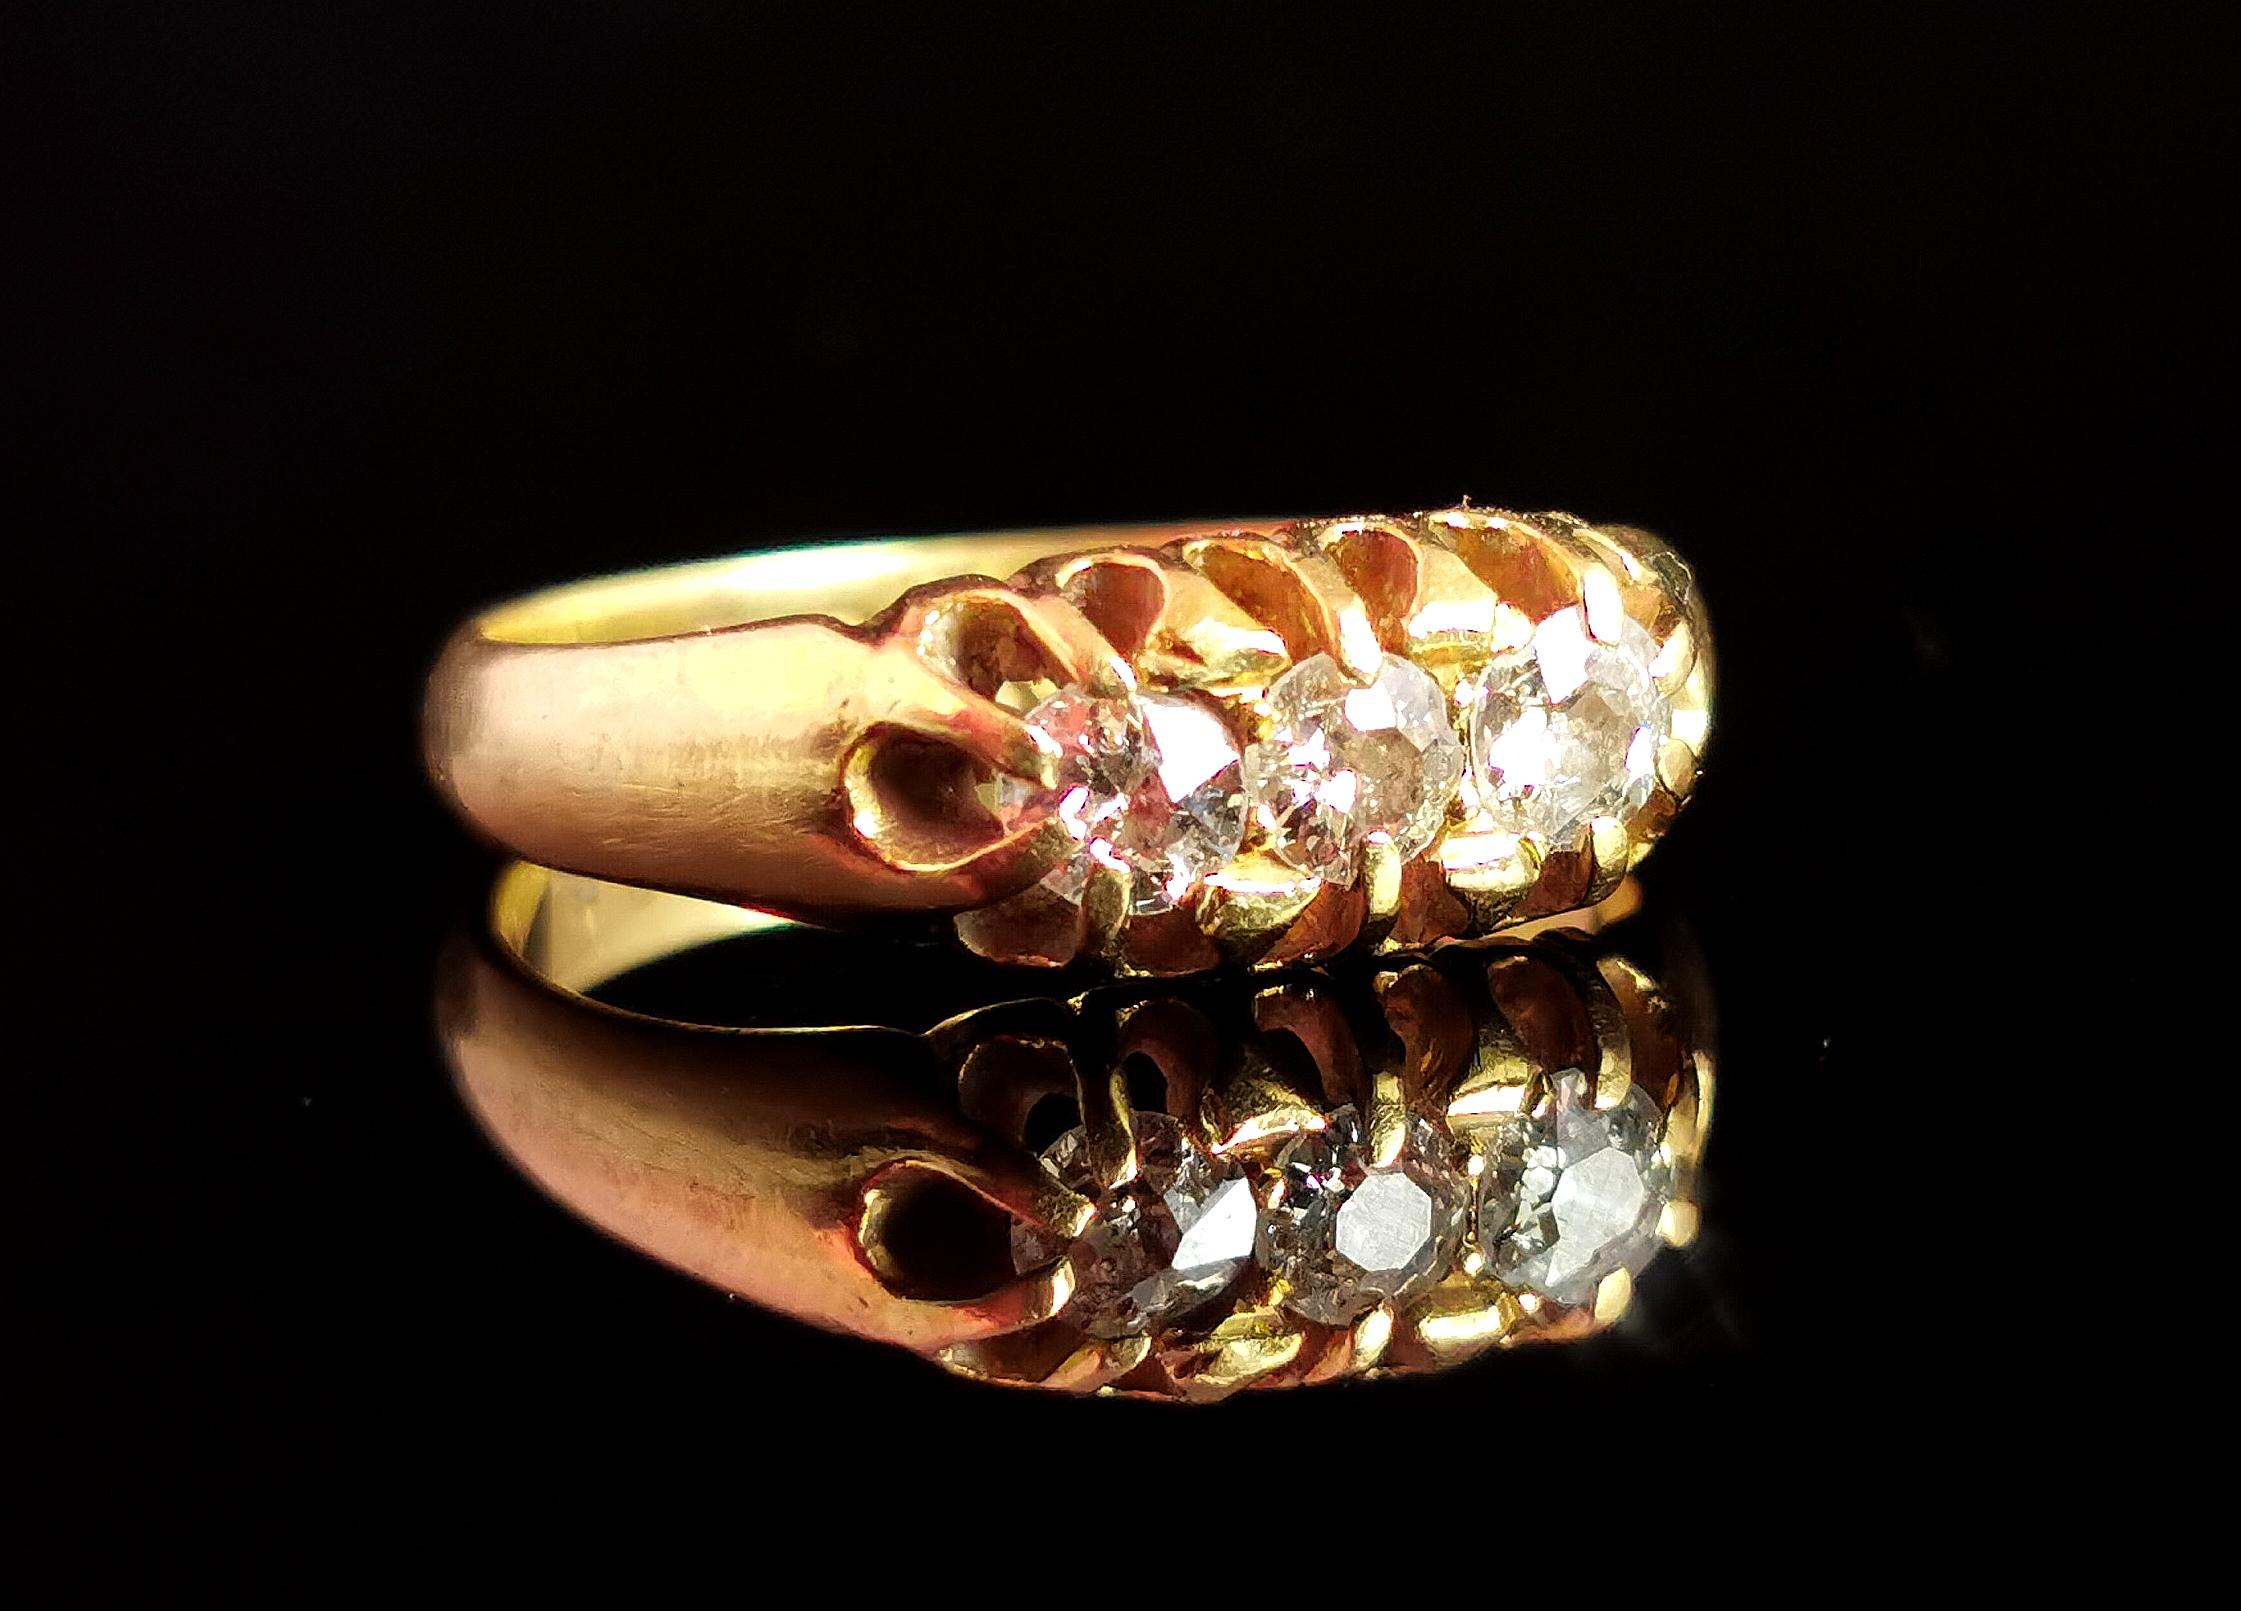 A gorgeous antique 18kt gold and diamond three stone ring.

Smooth and rich 18kt yellow gold band with tapering shoulders and a nice chunky band, it is a boat head ring with the stones claw set to the face, the type of rich golden hue found only on